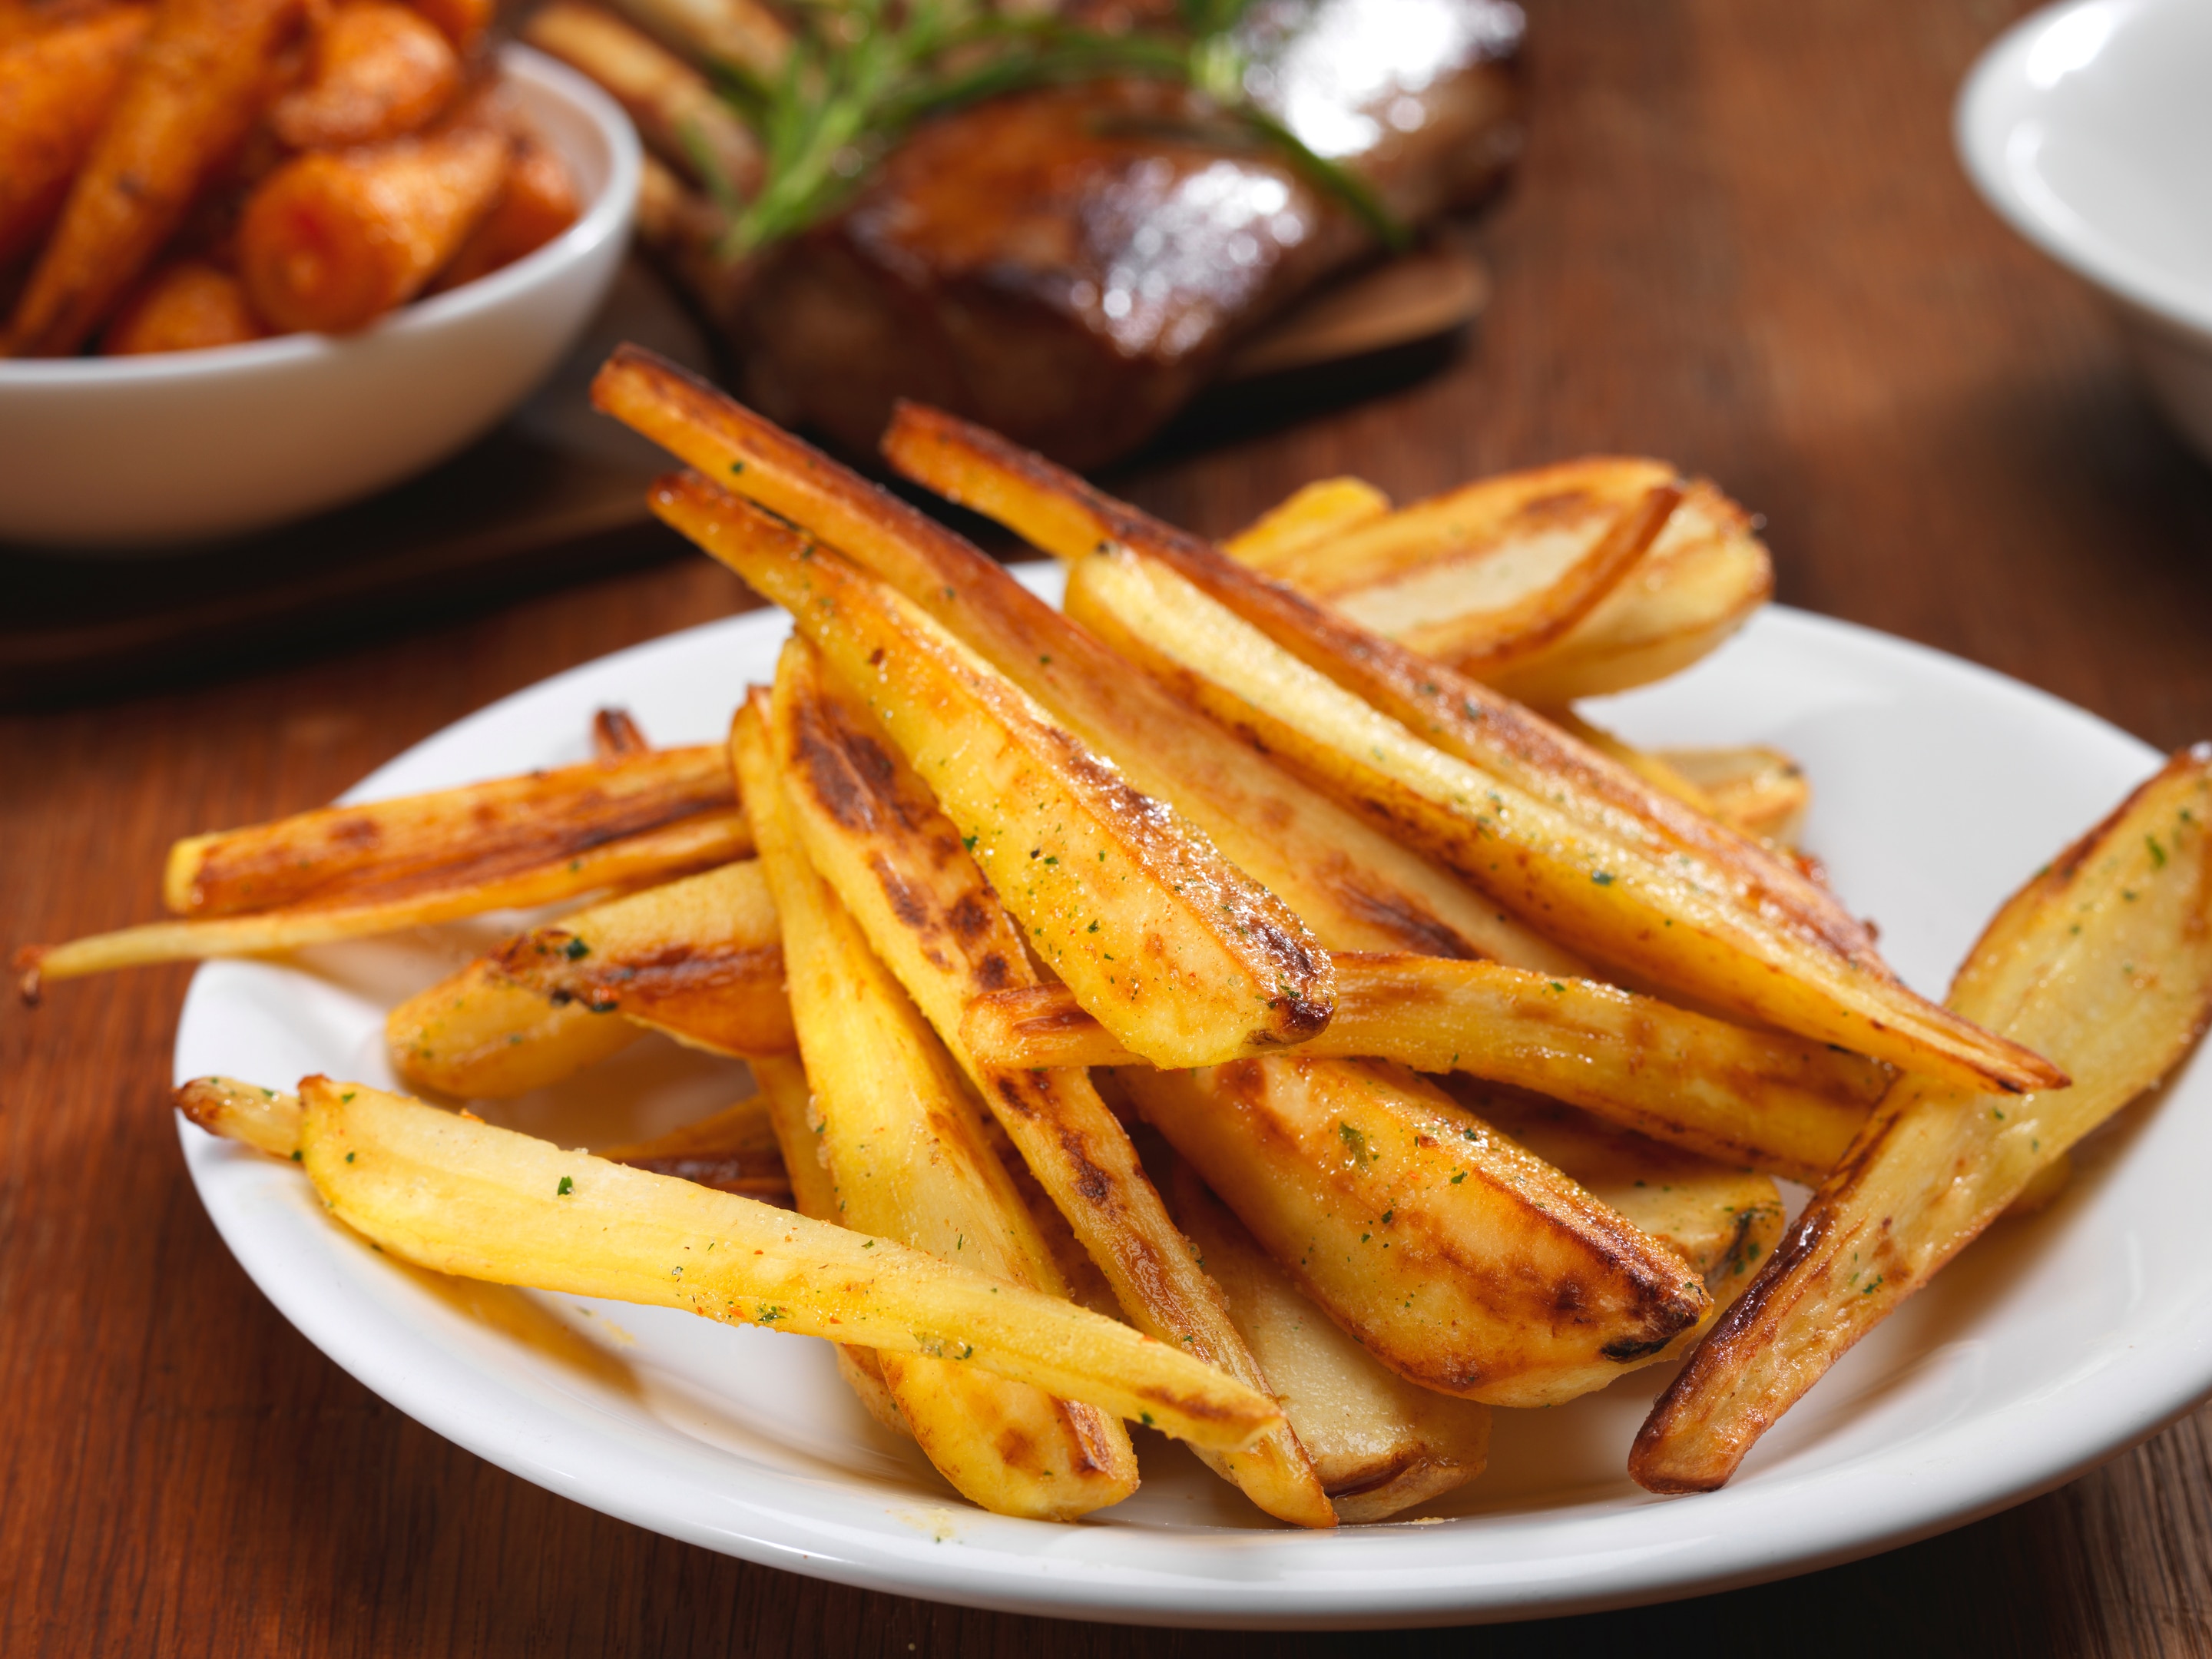 Roast parsnips with knorr vegetable stock cube